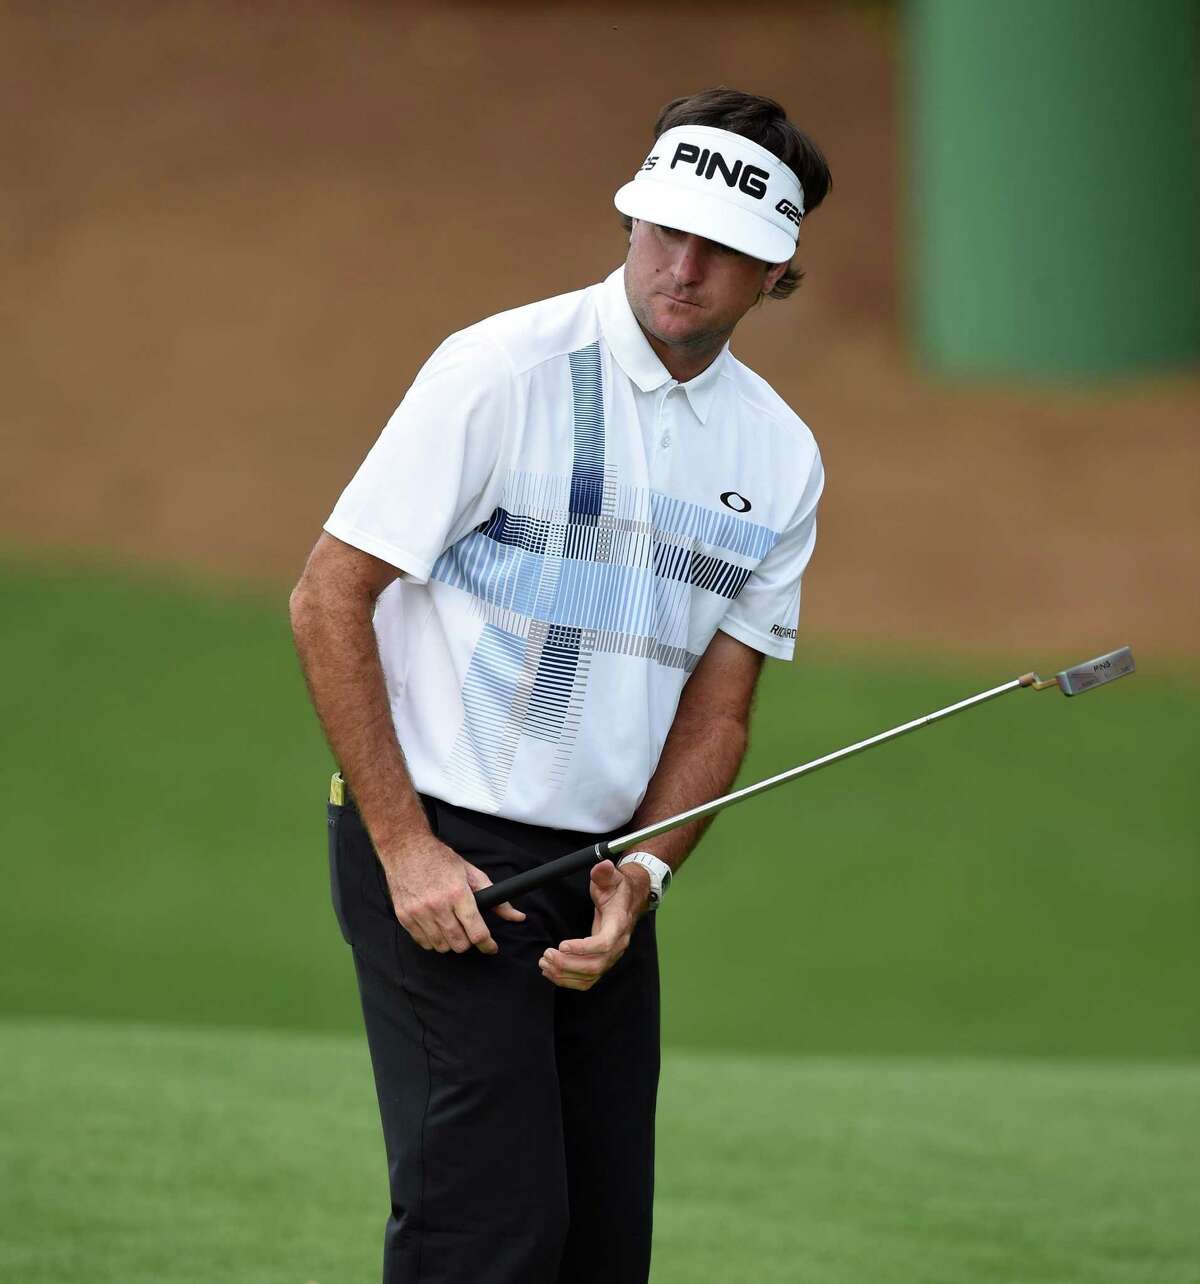 Top 92+ Images bubba watson shot on 10 at augusta video Completed